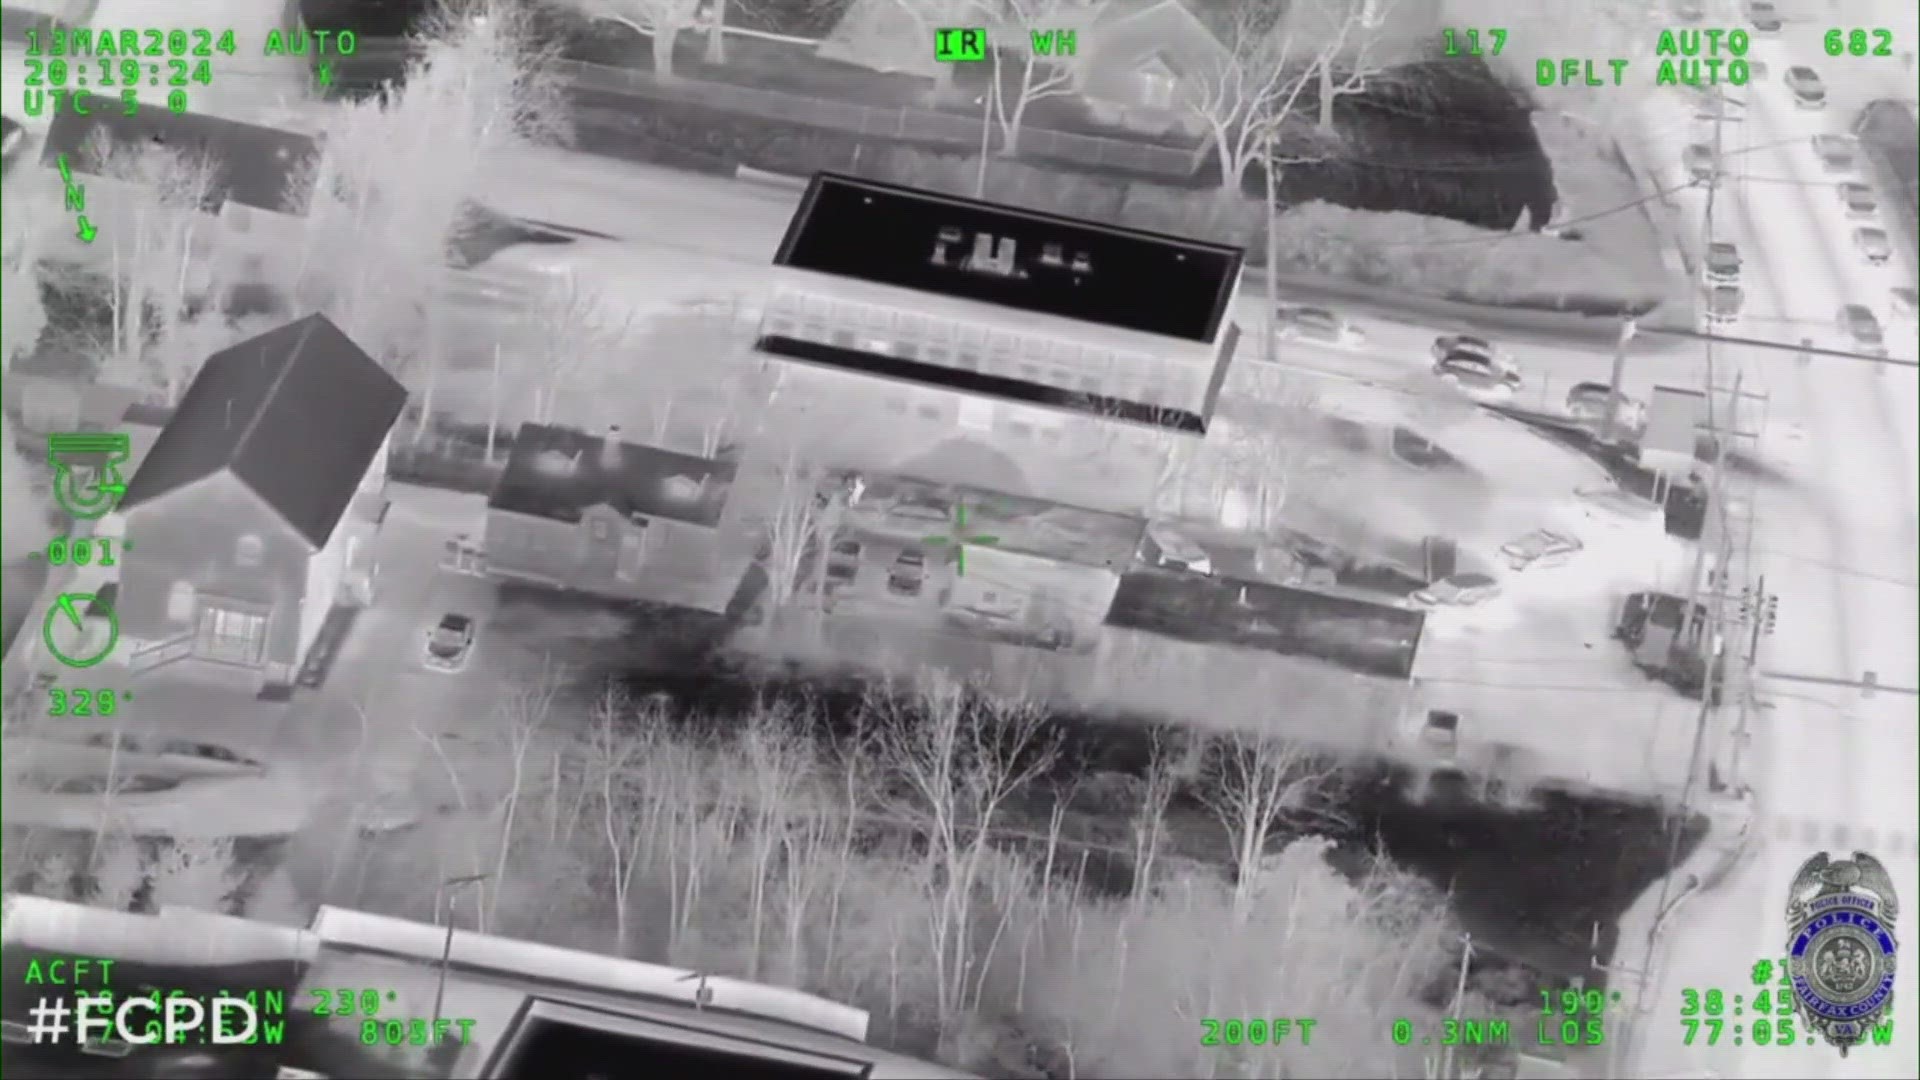 Fairfax County Police's helicopter pilot followed the suspect into a neighborhood using night vision technology, once he jumped out of the car and tried to hide.